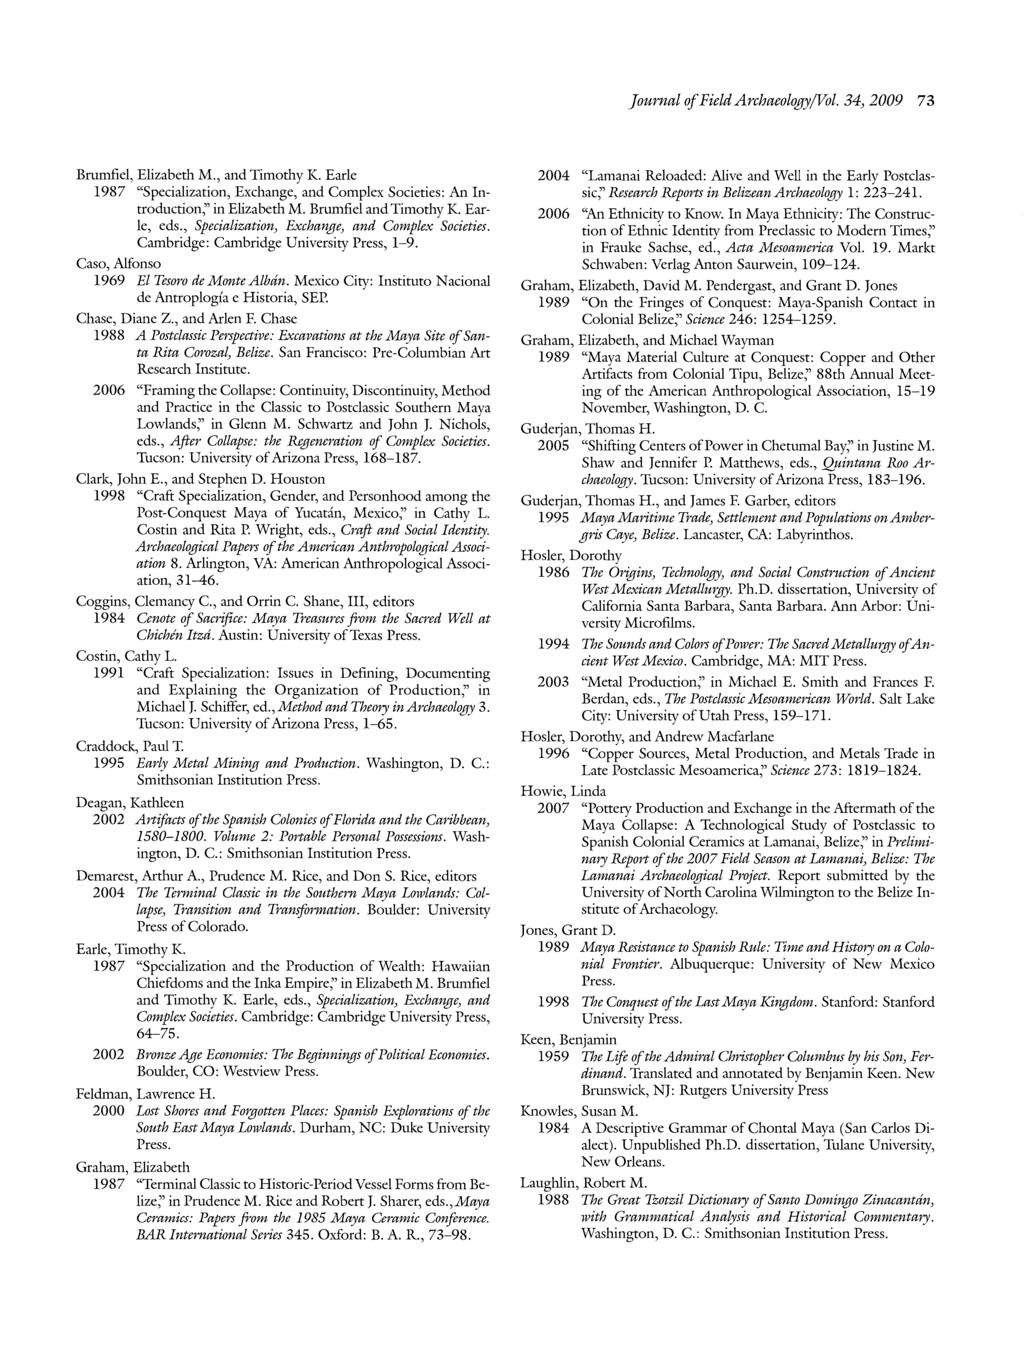 Journal of Field ArchaeologyjVol. 34) 2009 73 Brumfiel, Elizabeth M., and Timothy K. Earle 1987 "Specialization, Exchange, and Complex Societies: An Introduction;' in Elizabeth M.